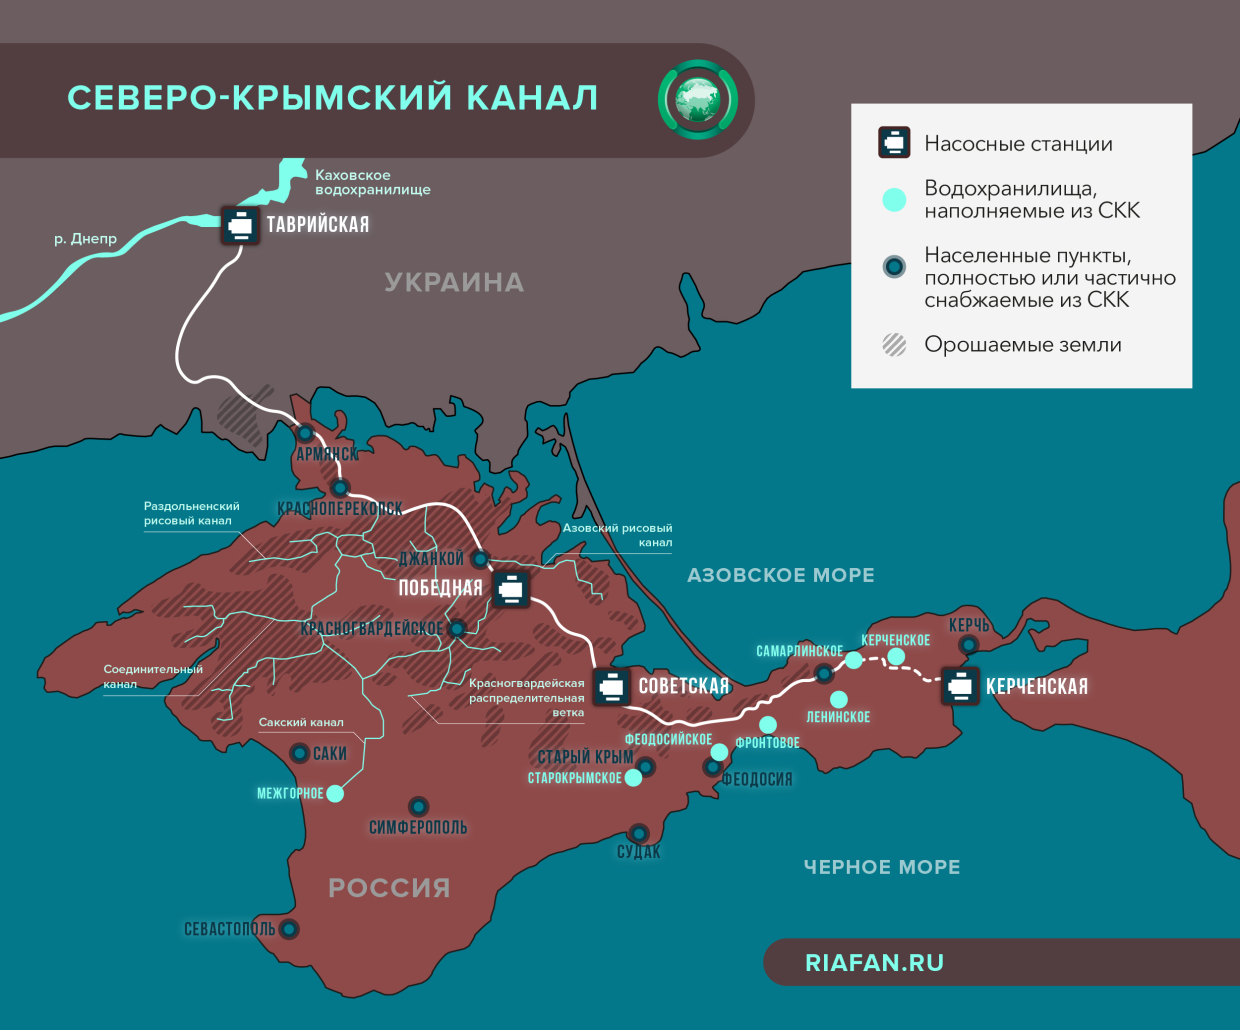 North Crimean Canal: how Kiev wanted to take the inhabitants of the peninsula hostage